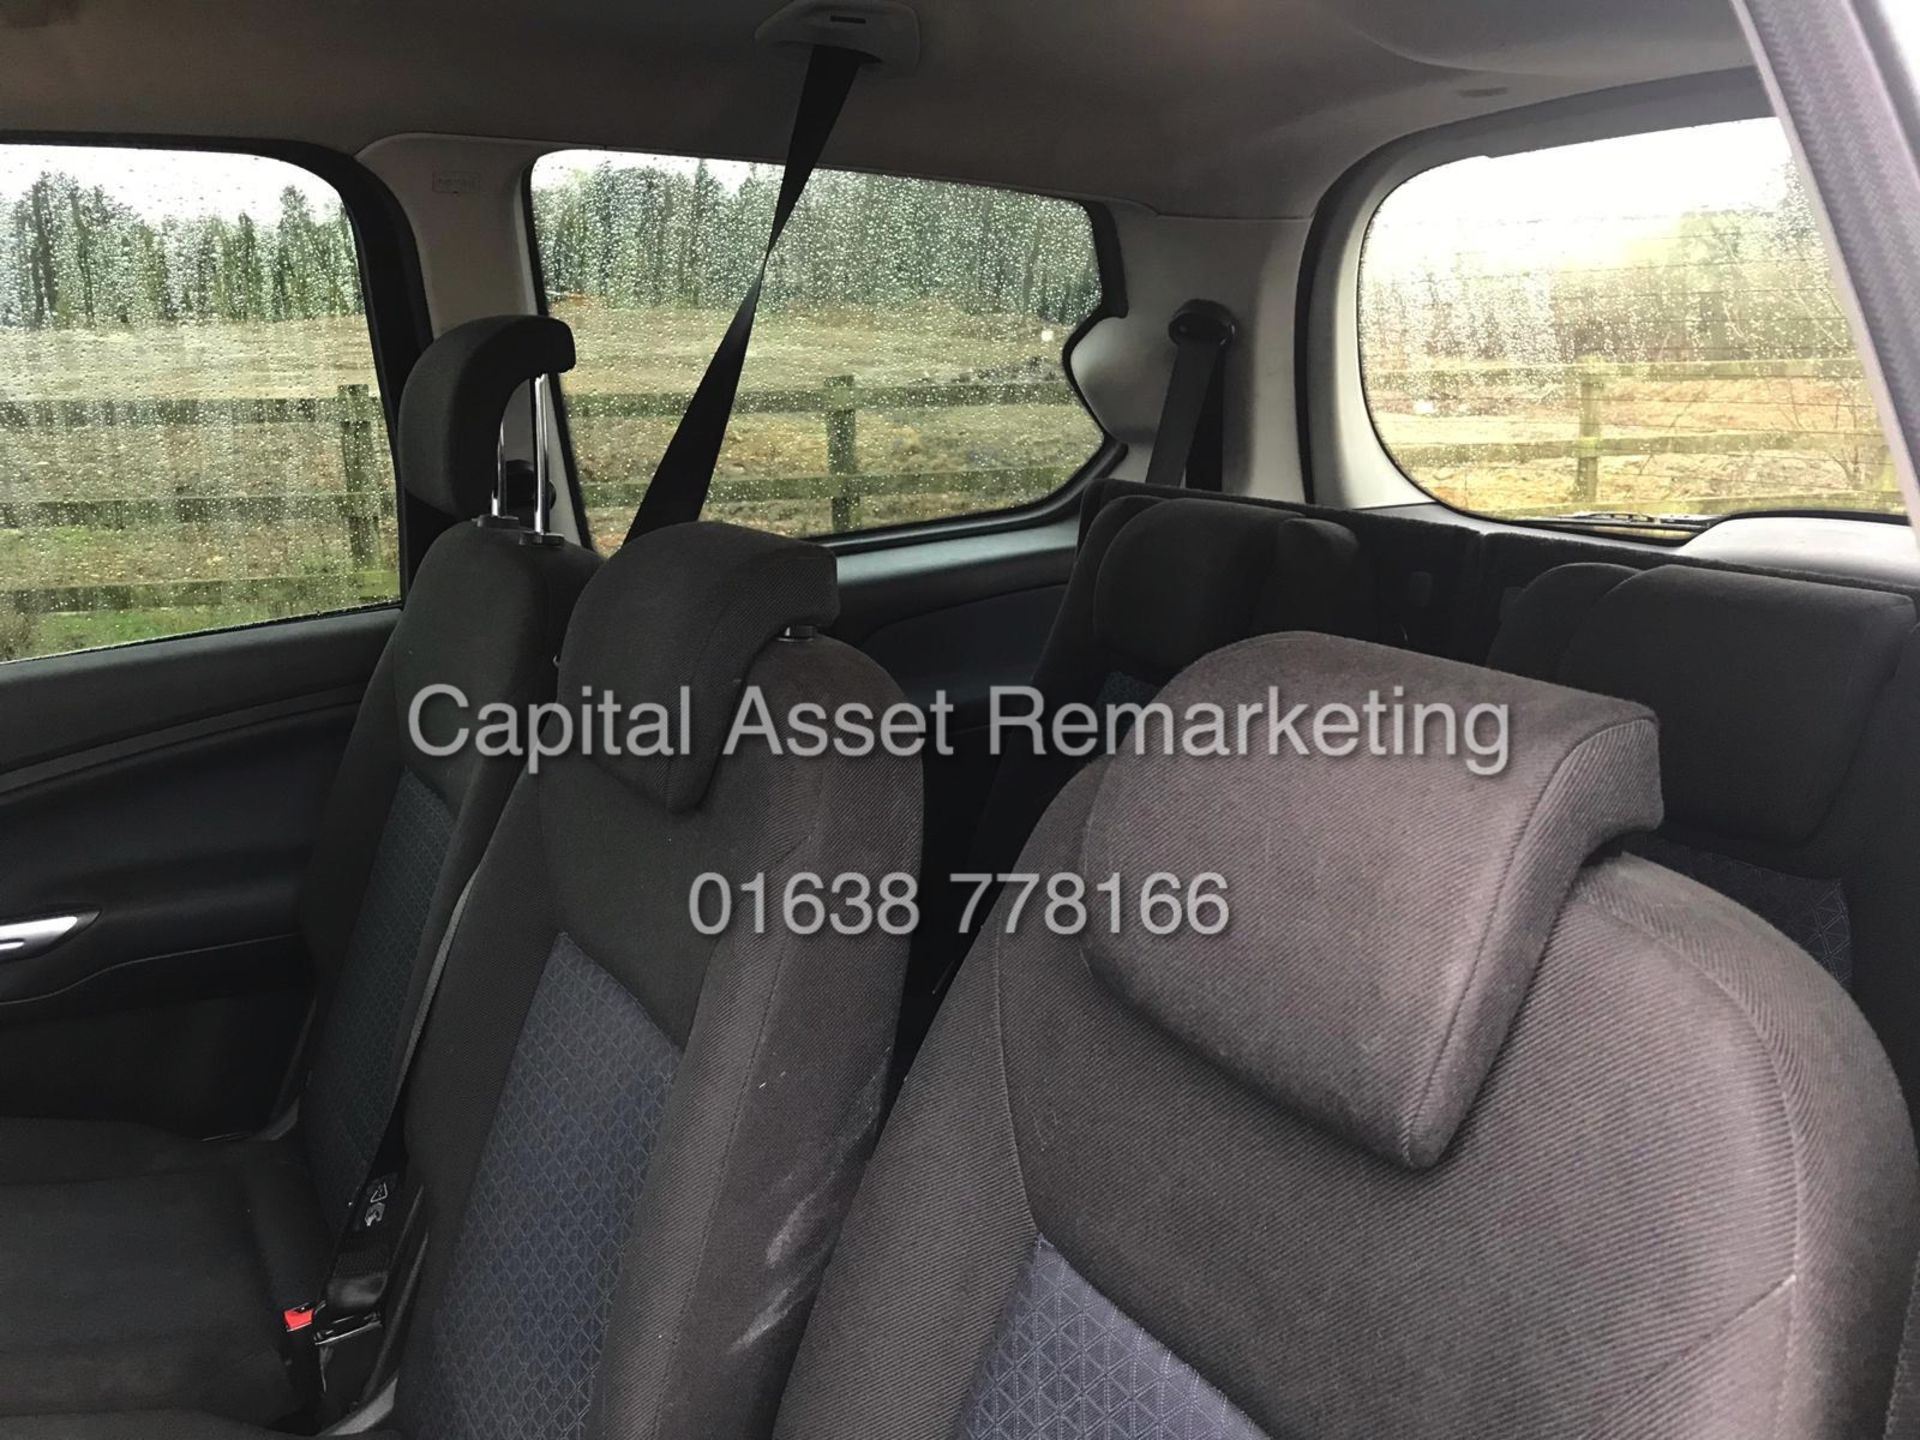 (ON SALE) FORD GALAXY 2.0TDCI "EDGE" 7 SEATER - 08 REG - AIR CON - 1 PREVIOUS OWNER - BLACK - Image 10 of 14